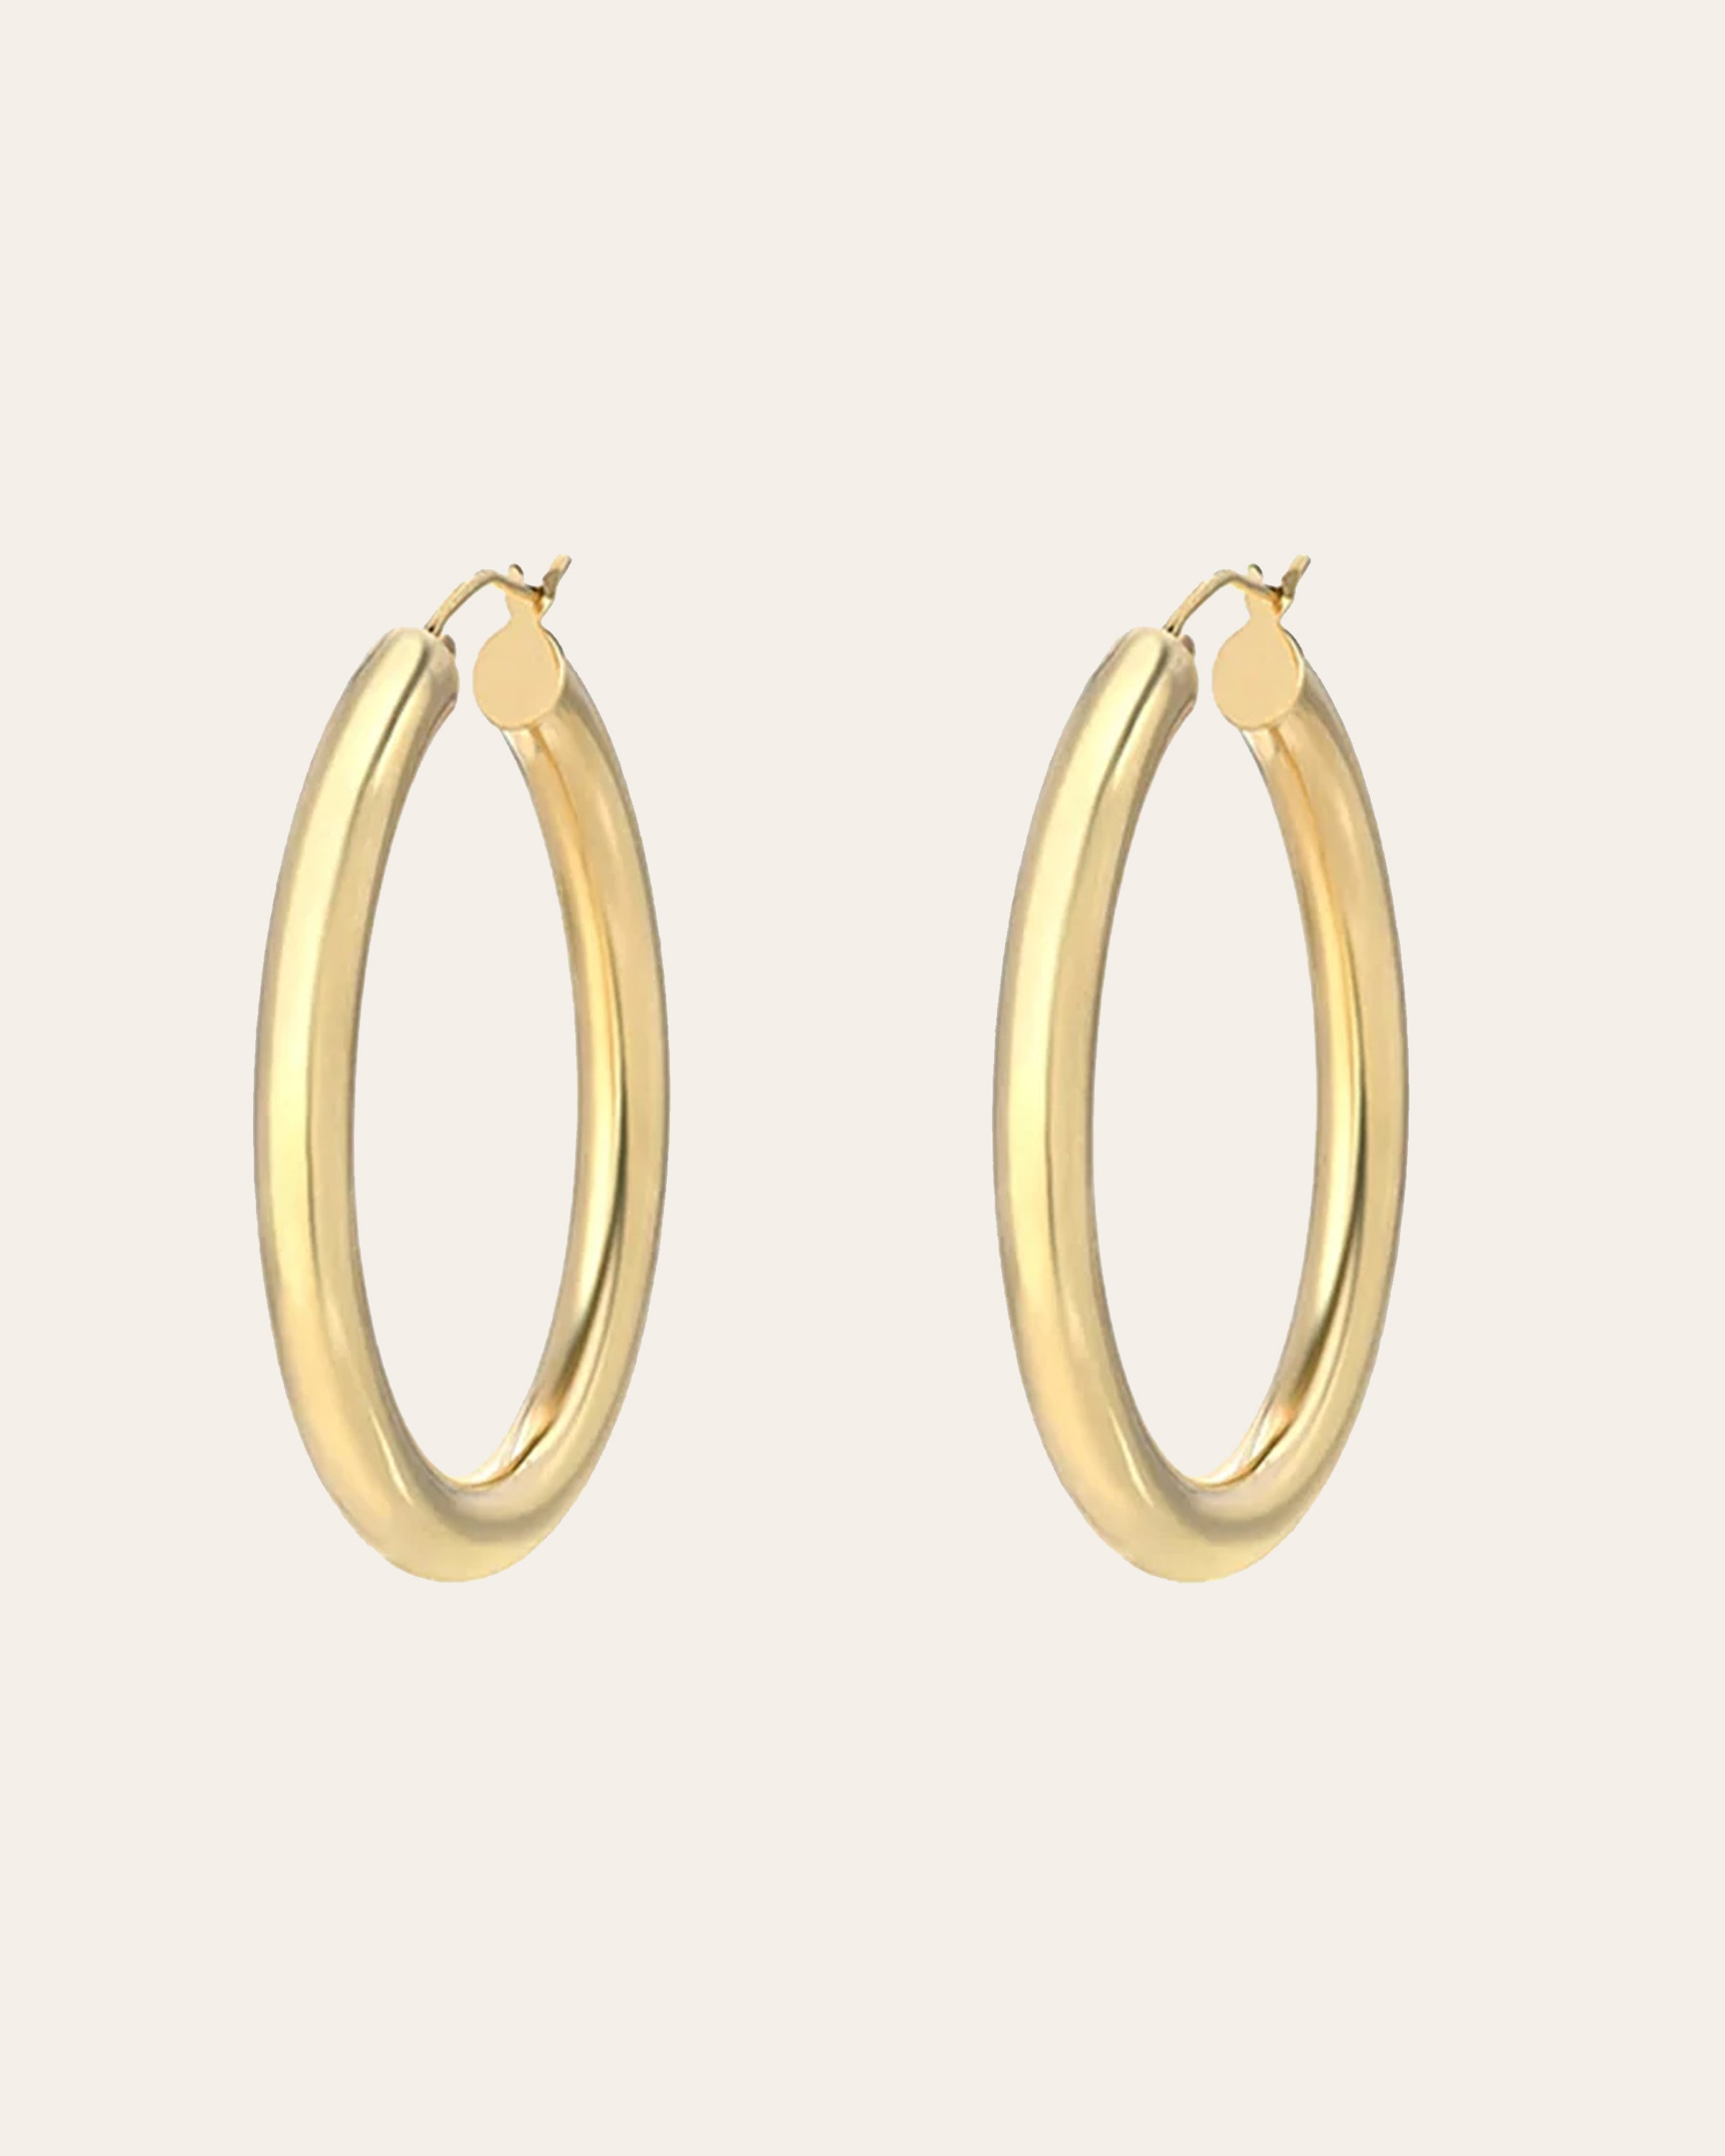 Thick Gold Hoop Earrings - 14k Solid Gold